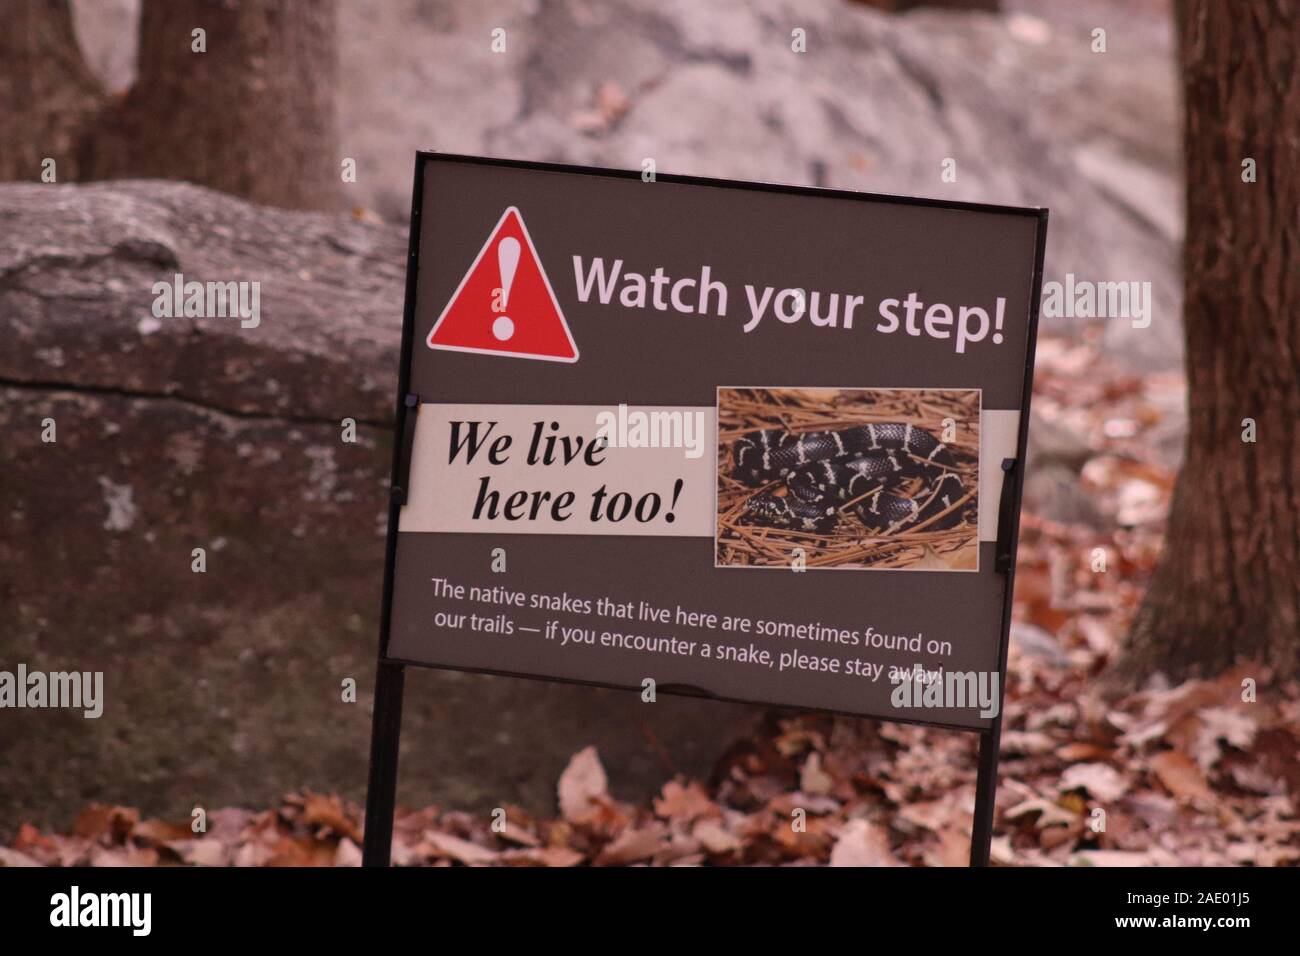 Watch your step! We live here too! Stock Photo